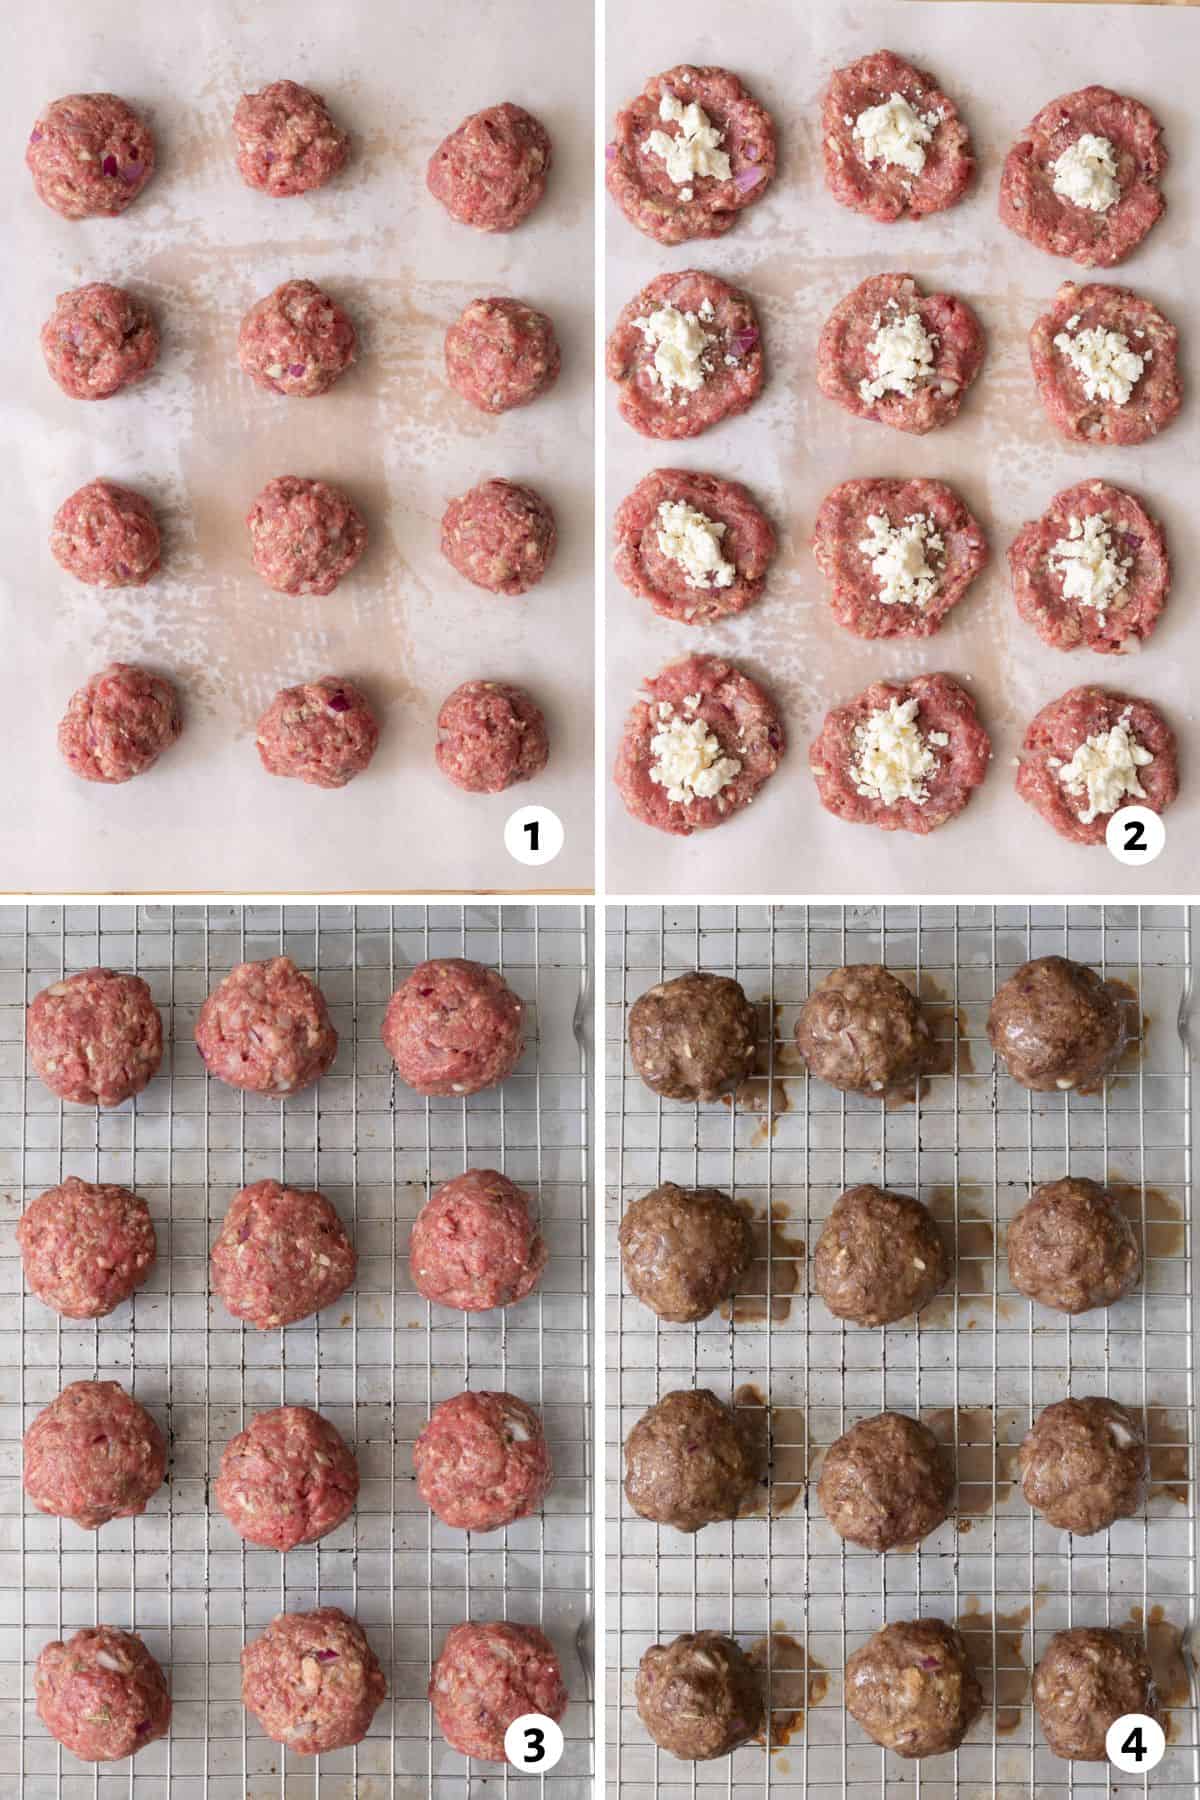 4 image collage prepping meatballs, stuffing them with cheese, placing on a wire rack to be baked, and showing them after being baked.